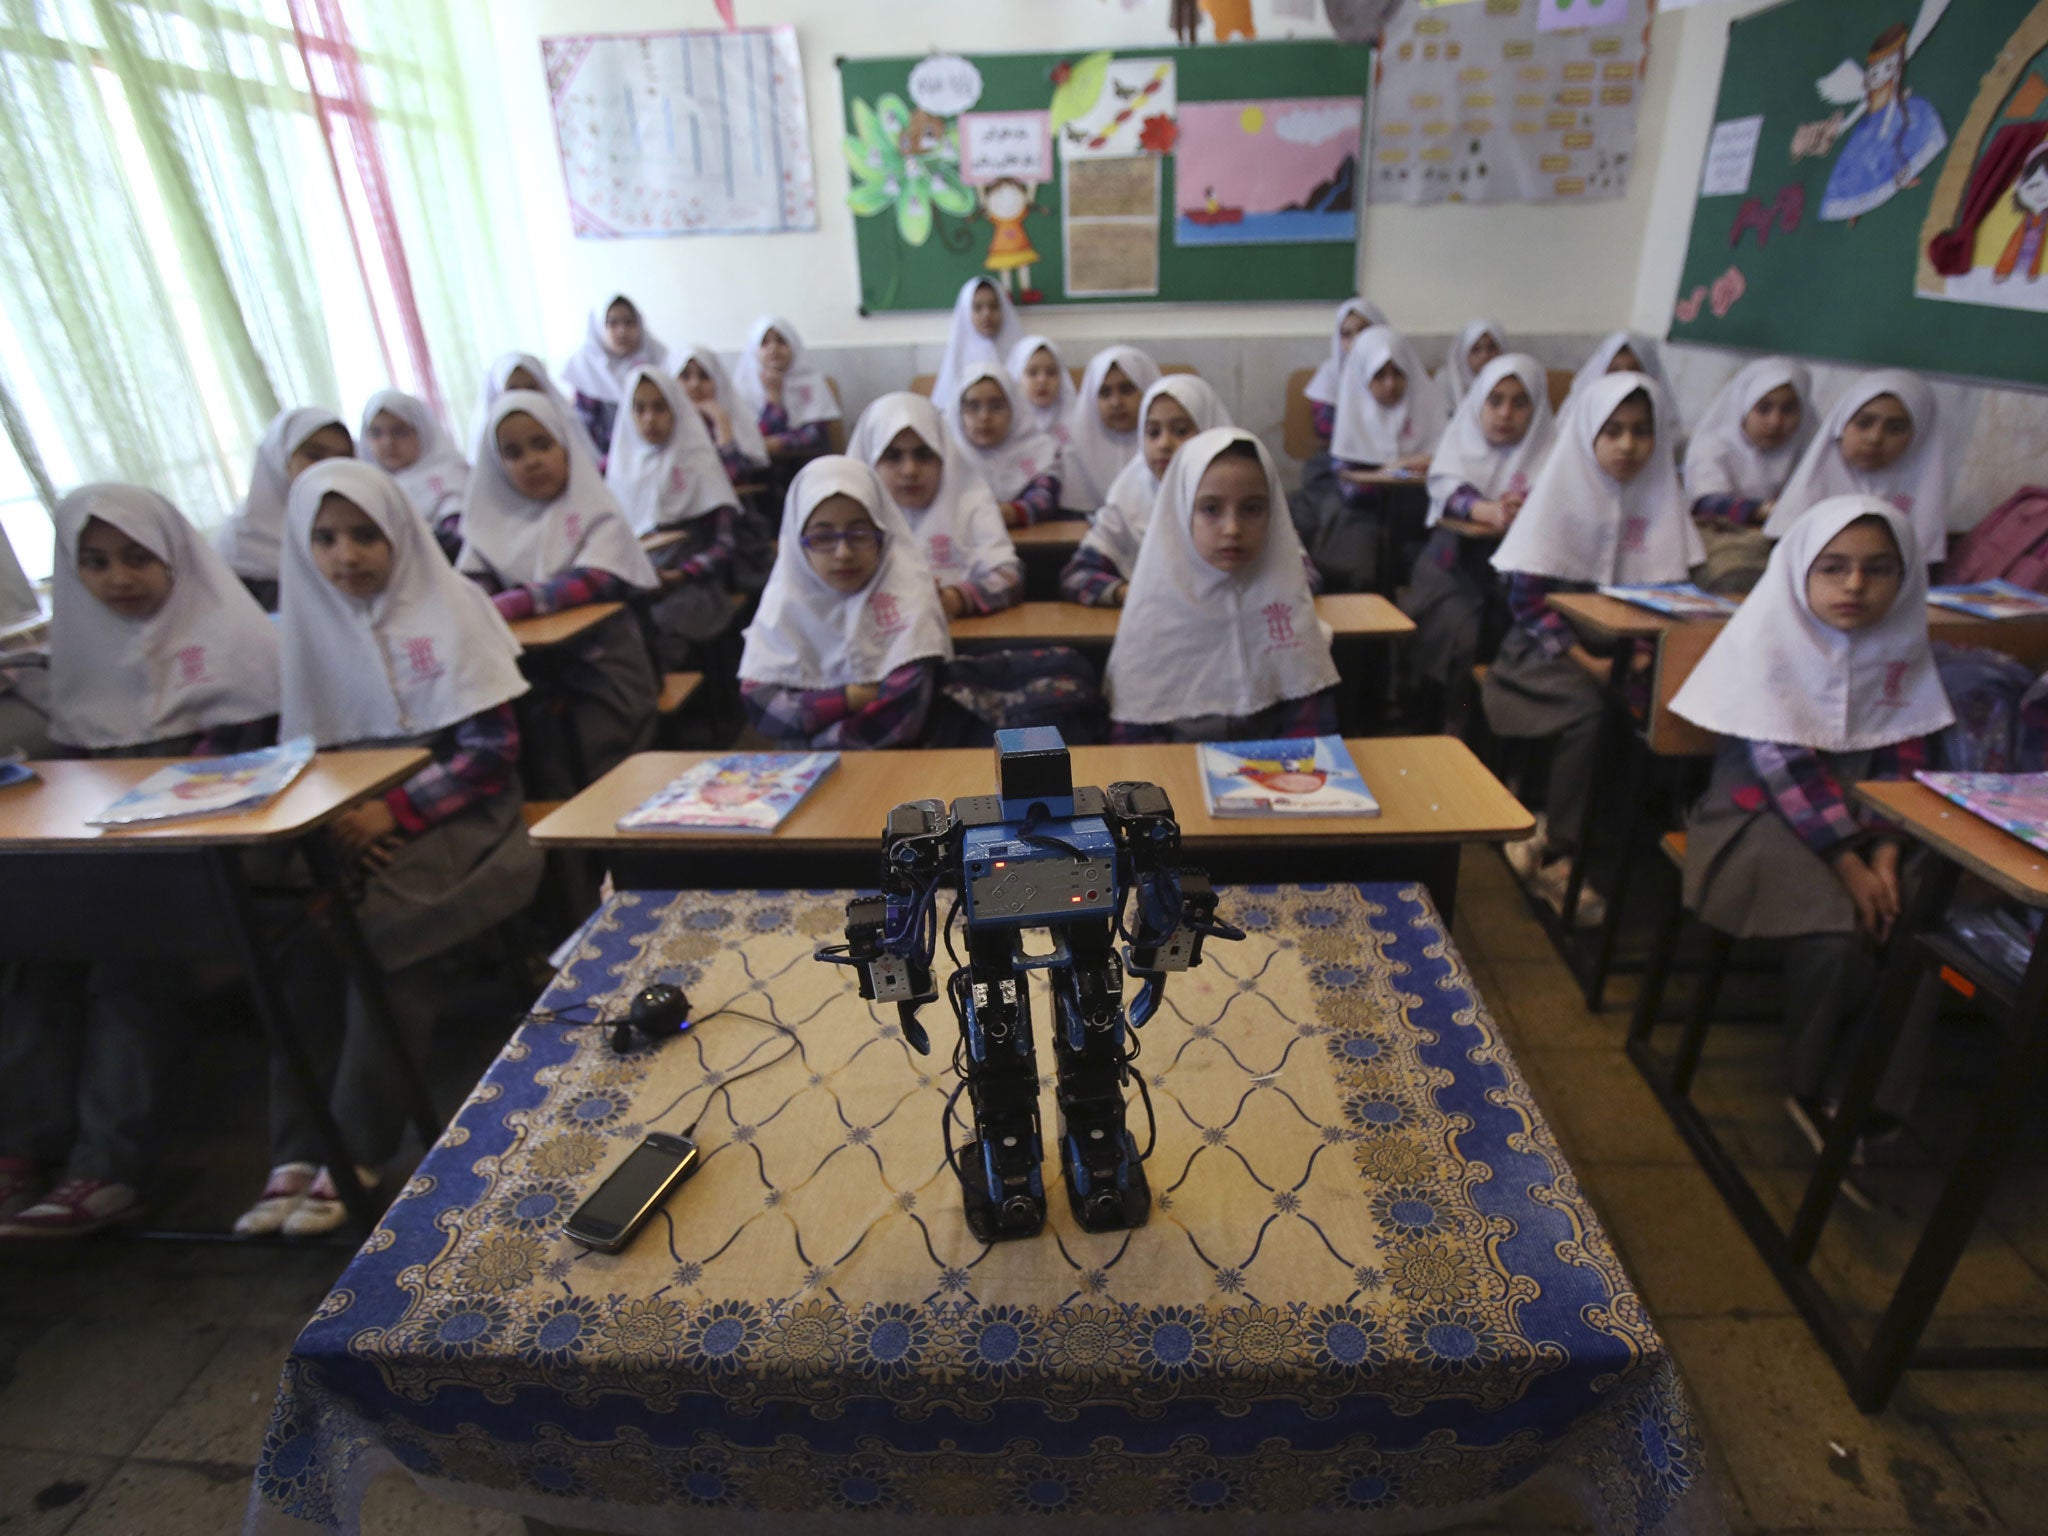 In this picture taken on Monday, Feb. 24, 2014, Veldan, a humanoid praying robot which is built by Iranian schoolteacher Akbar Rezaie, performs morning prayer in front of Alborz elementary school girls in the city of Varamin some 21 miles (35 kilometers)